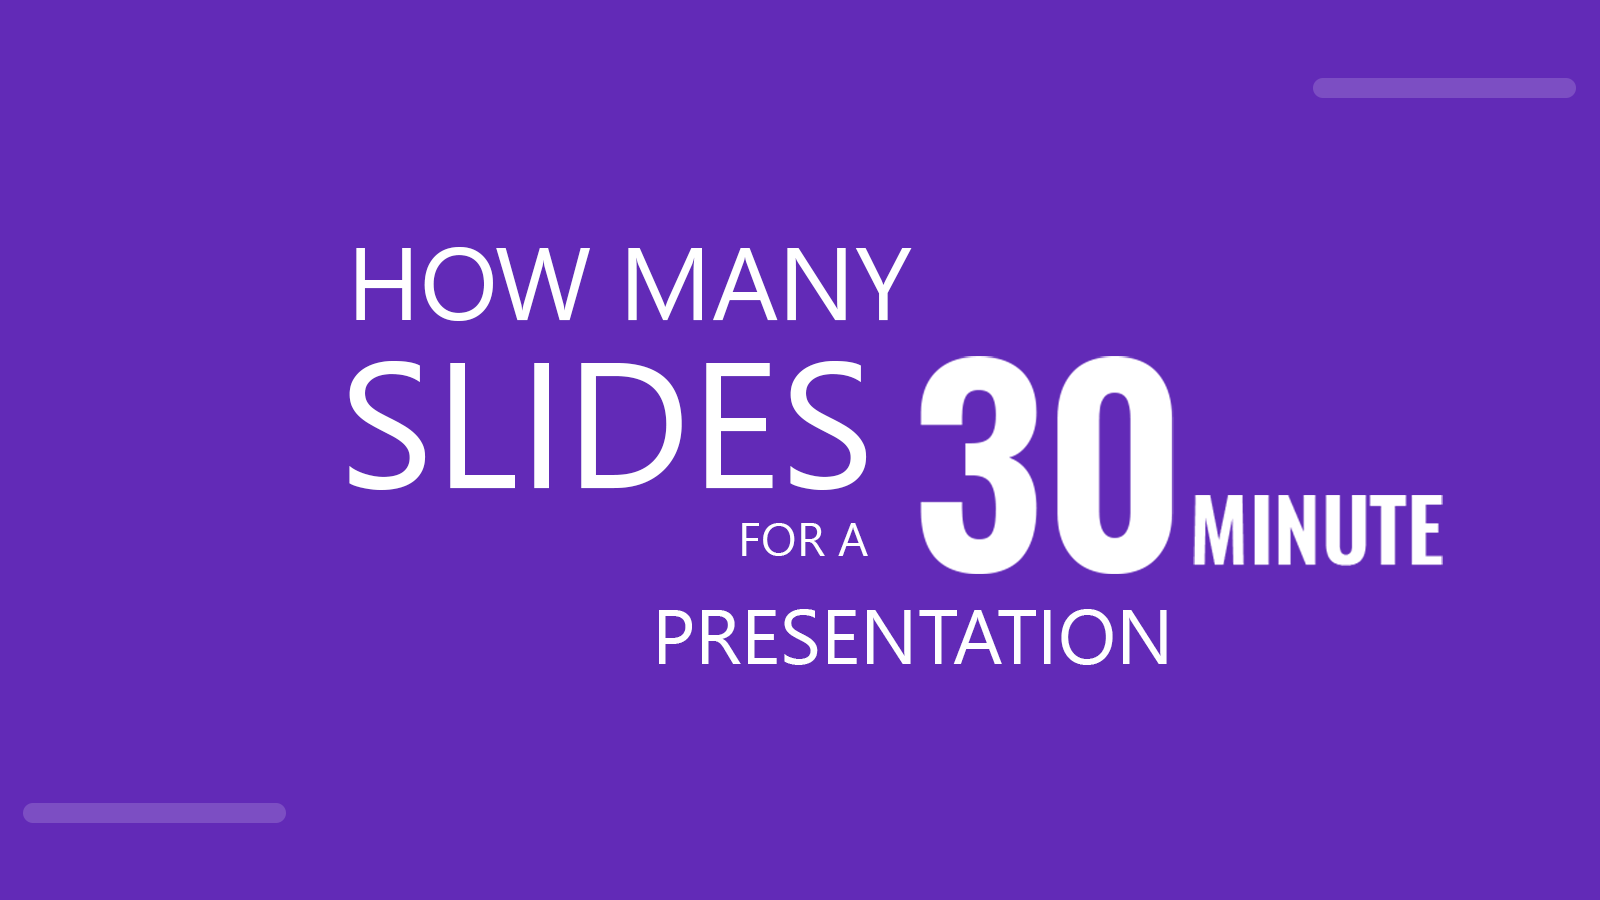 words for 30 minute presentation